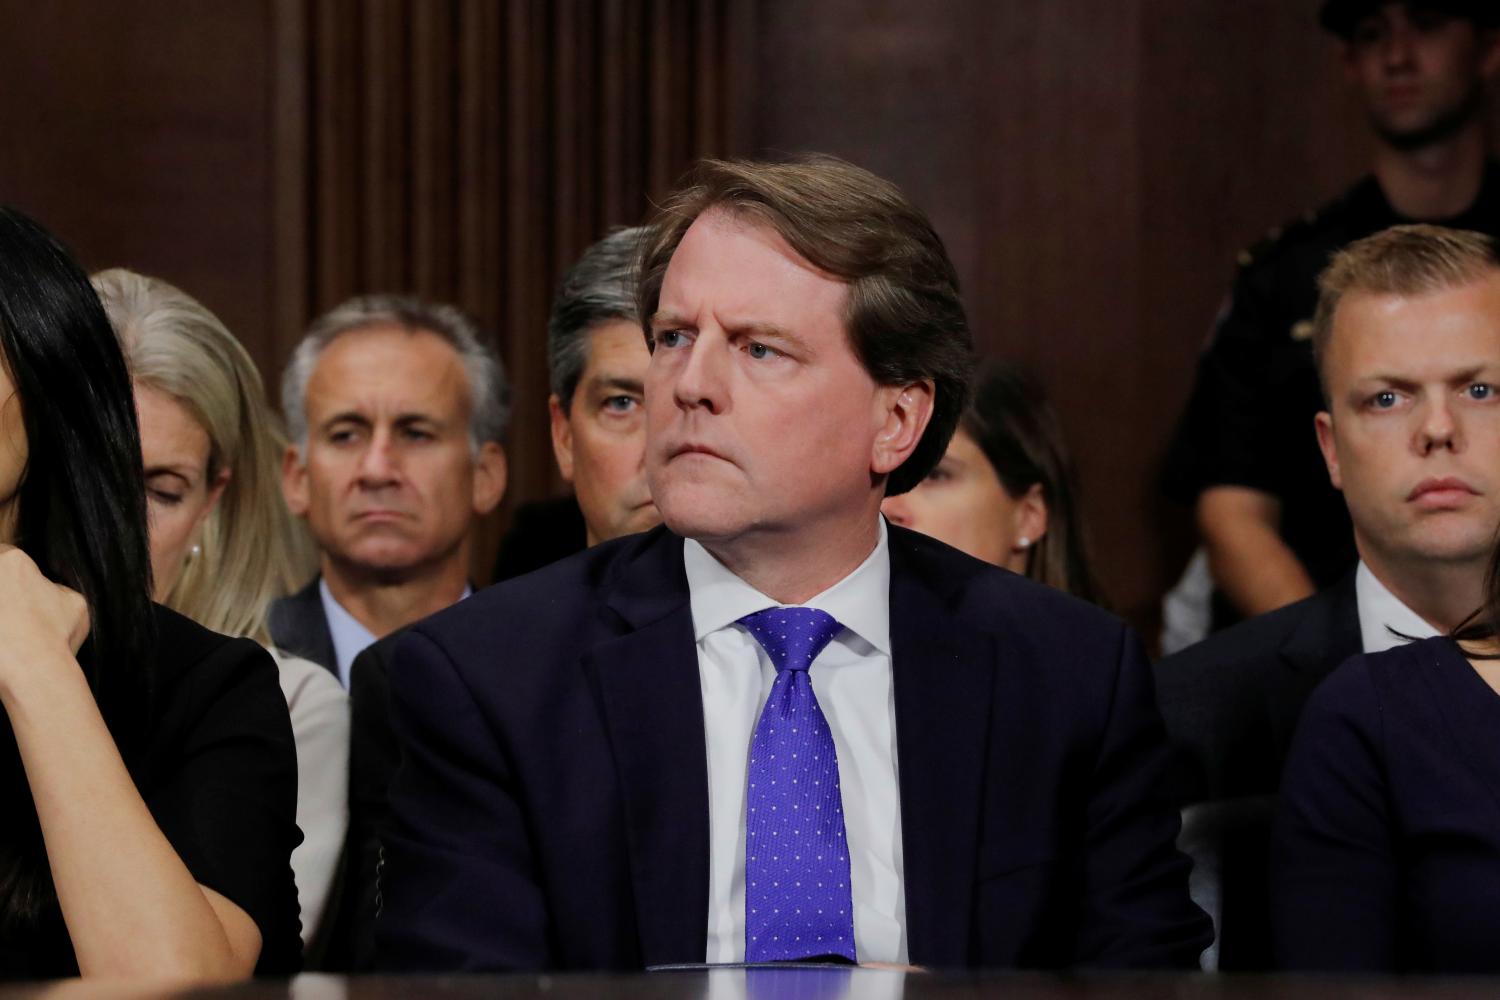 White House counsel Don Mcgahn listens to U.S. Supreme Court nominee Brett Kavanaugh testify before a Senate Judiciary Committee confirmation hearing on Capitol Hill in Washington, U.S., September 27, 2018. REUTERS/Jim Bourg